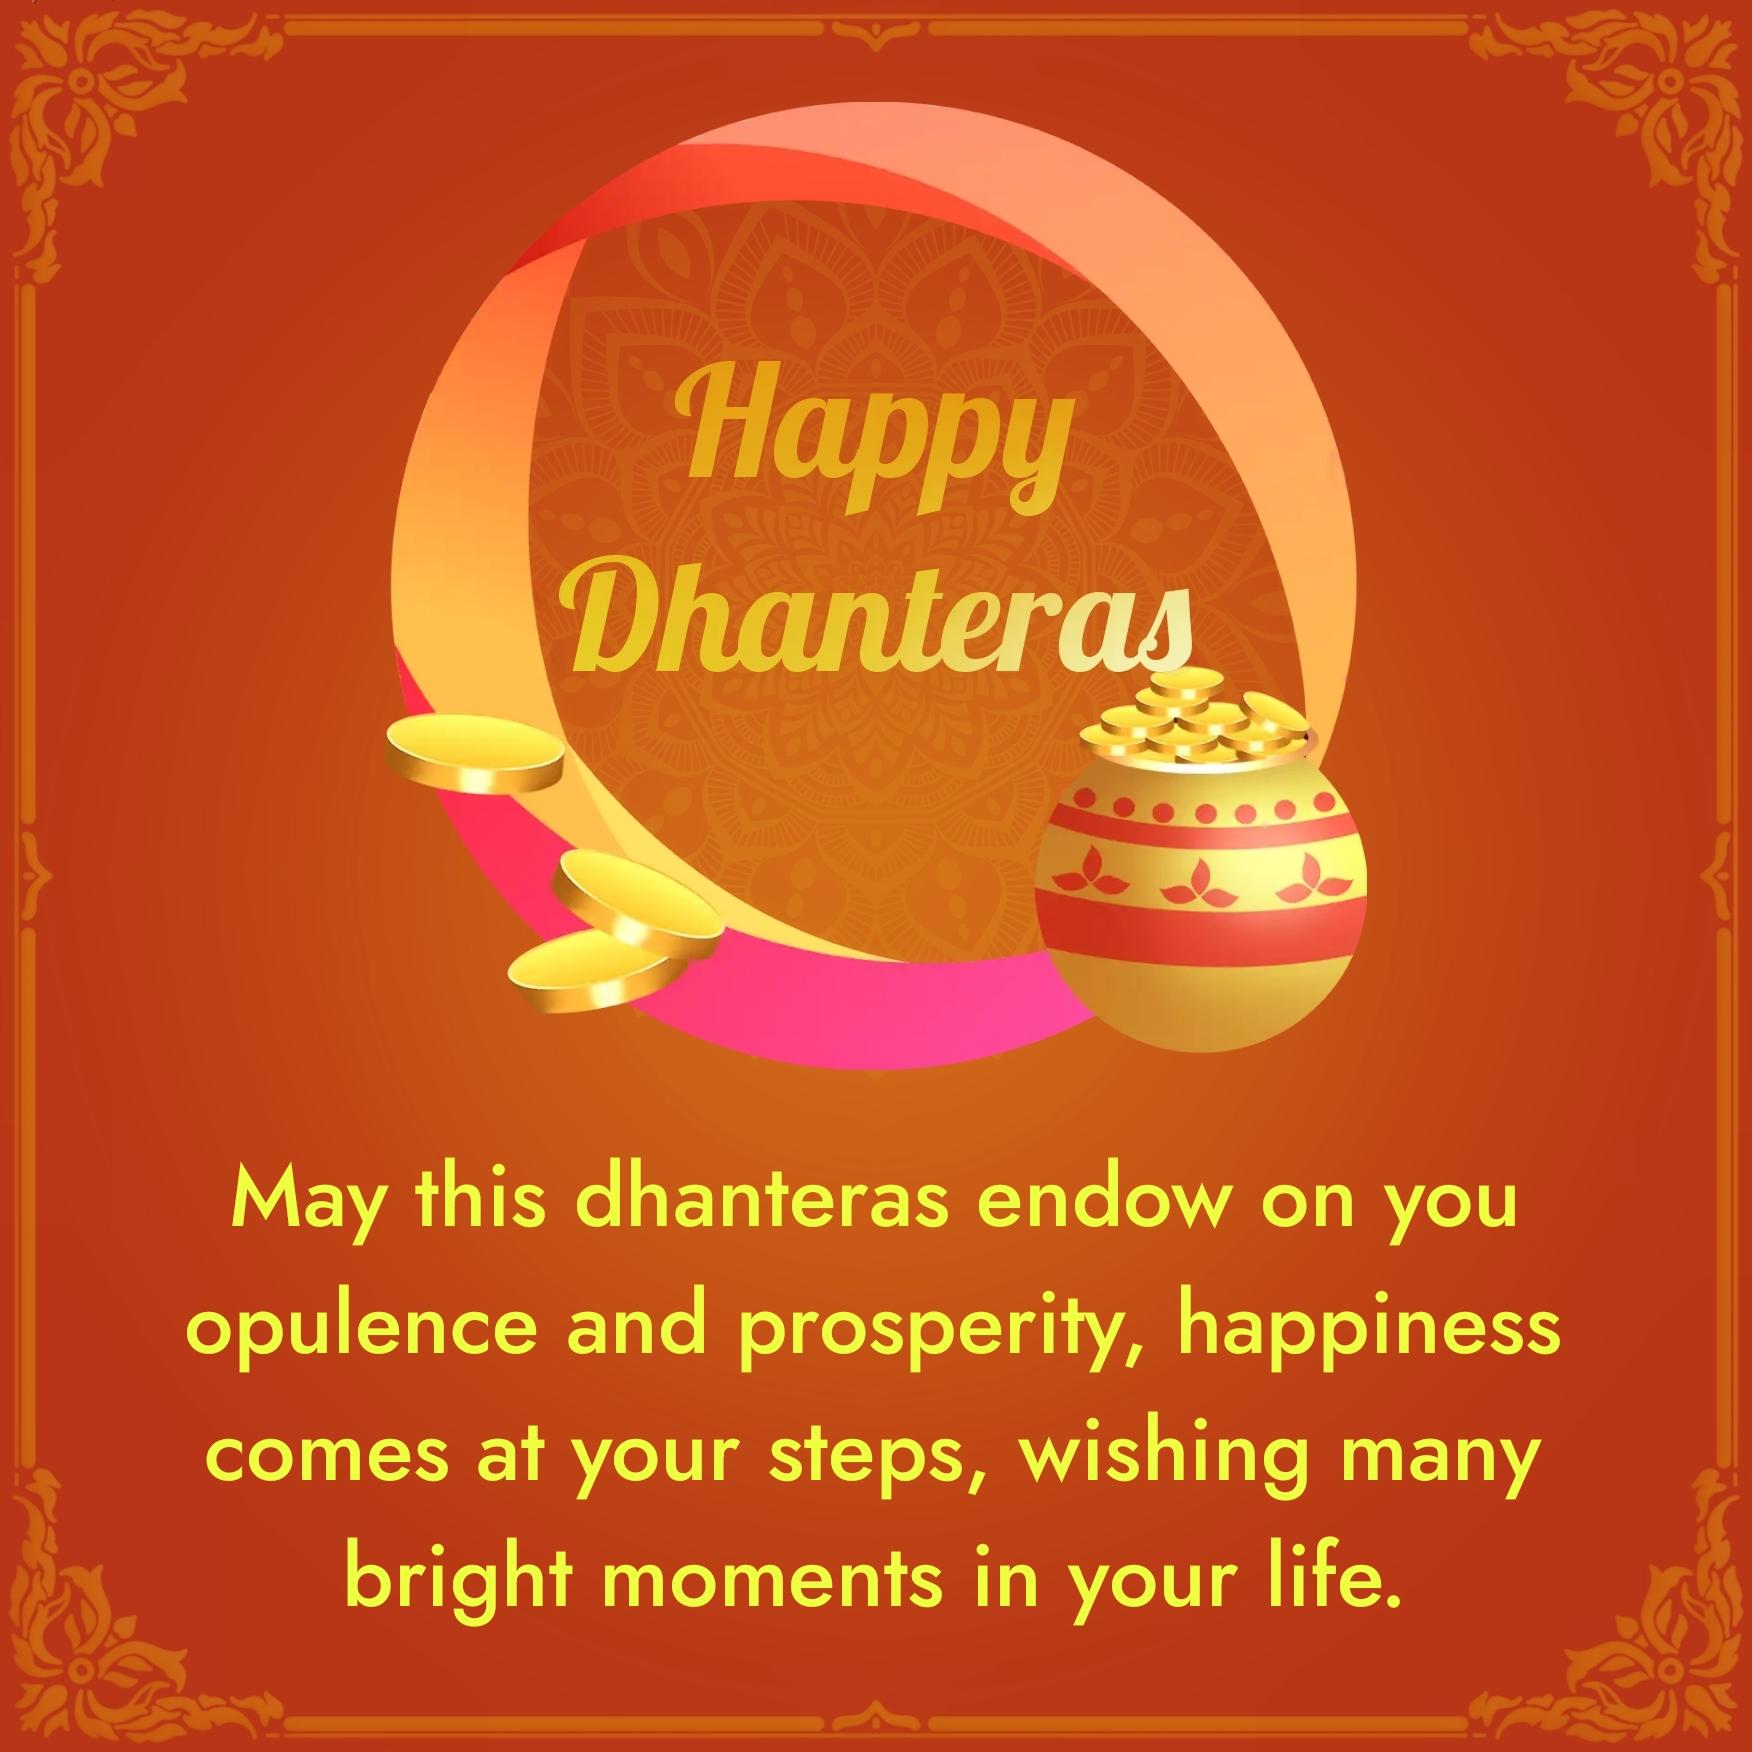 May this dhanteras endow on you opulence and prosperity